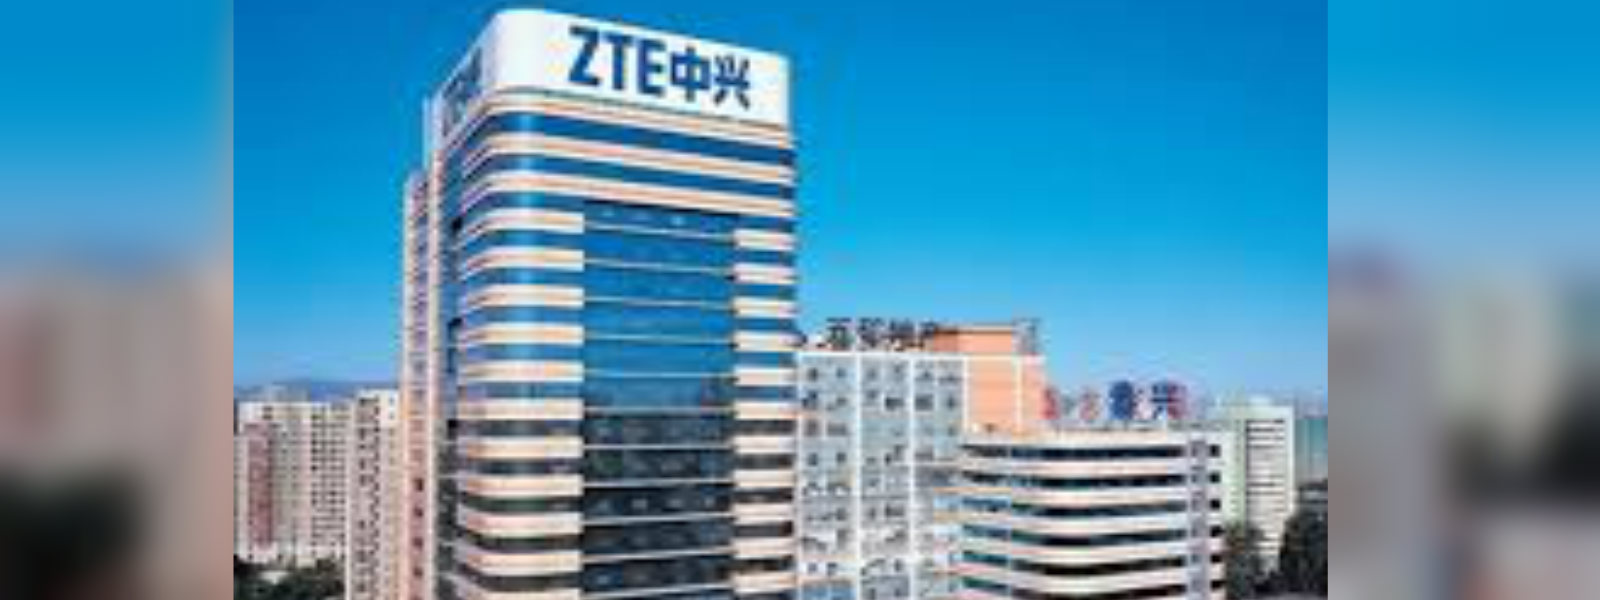 US temporarily lifts part of sales ban on ZTE